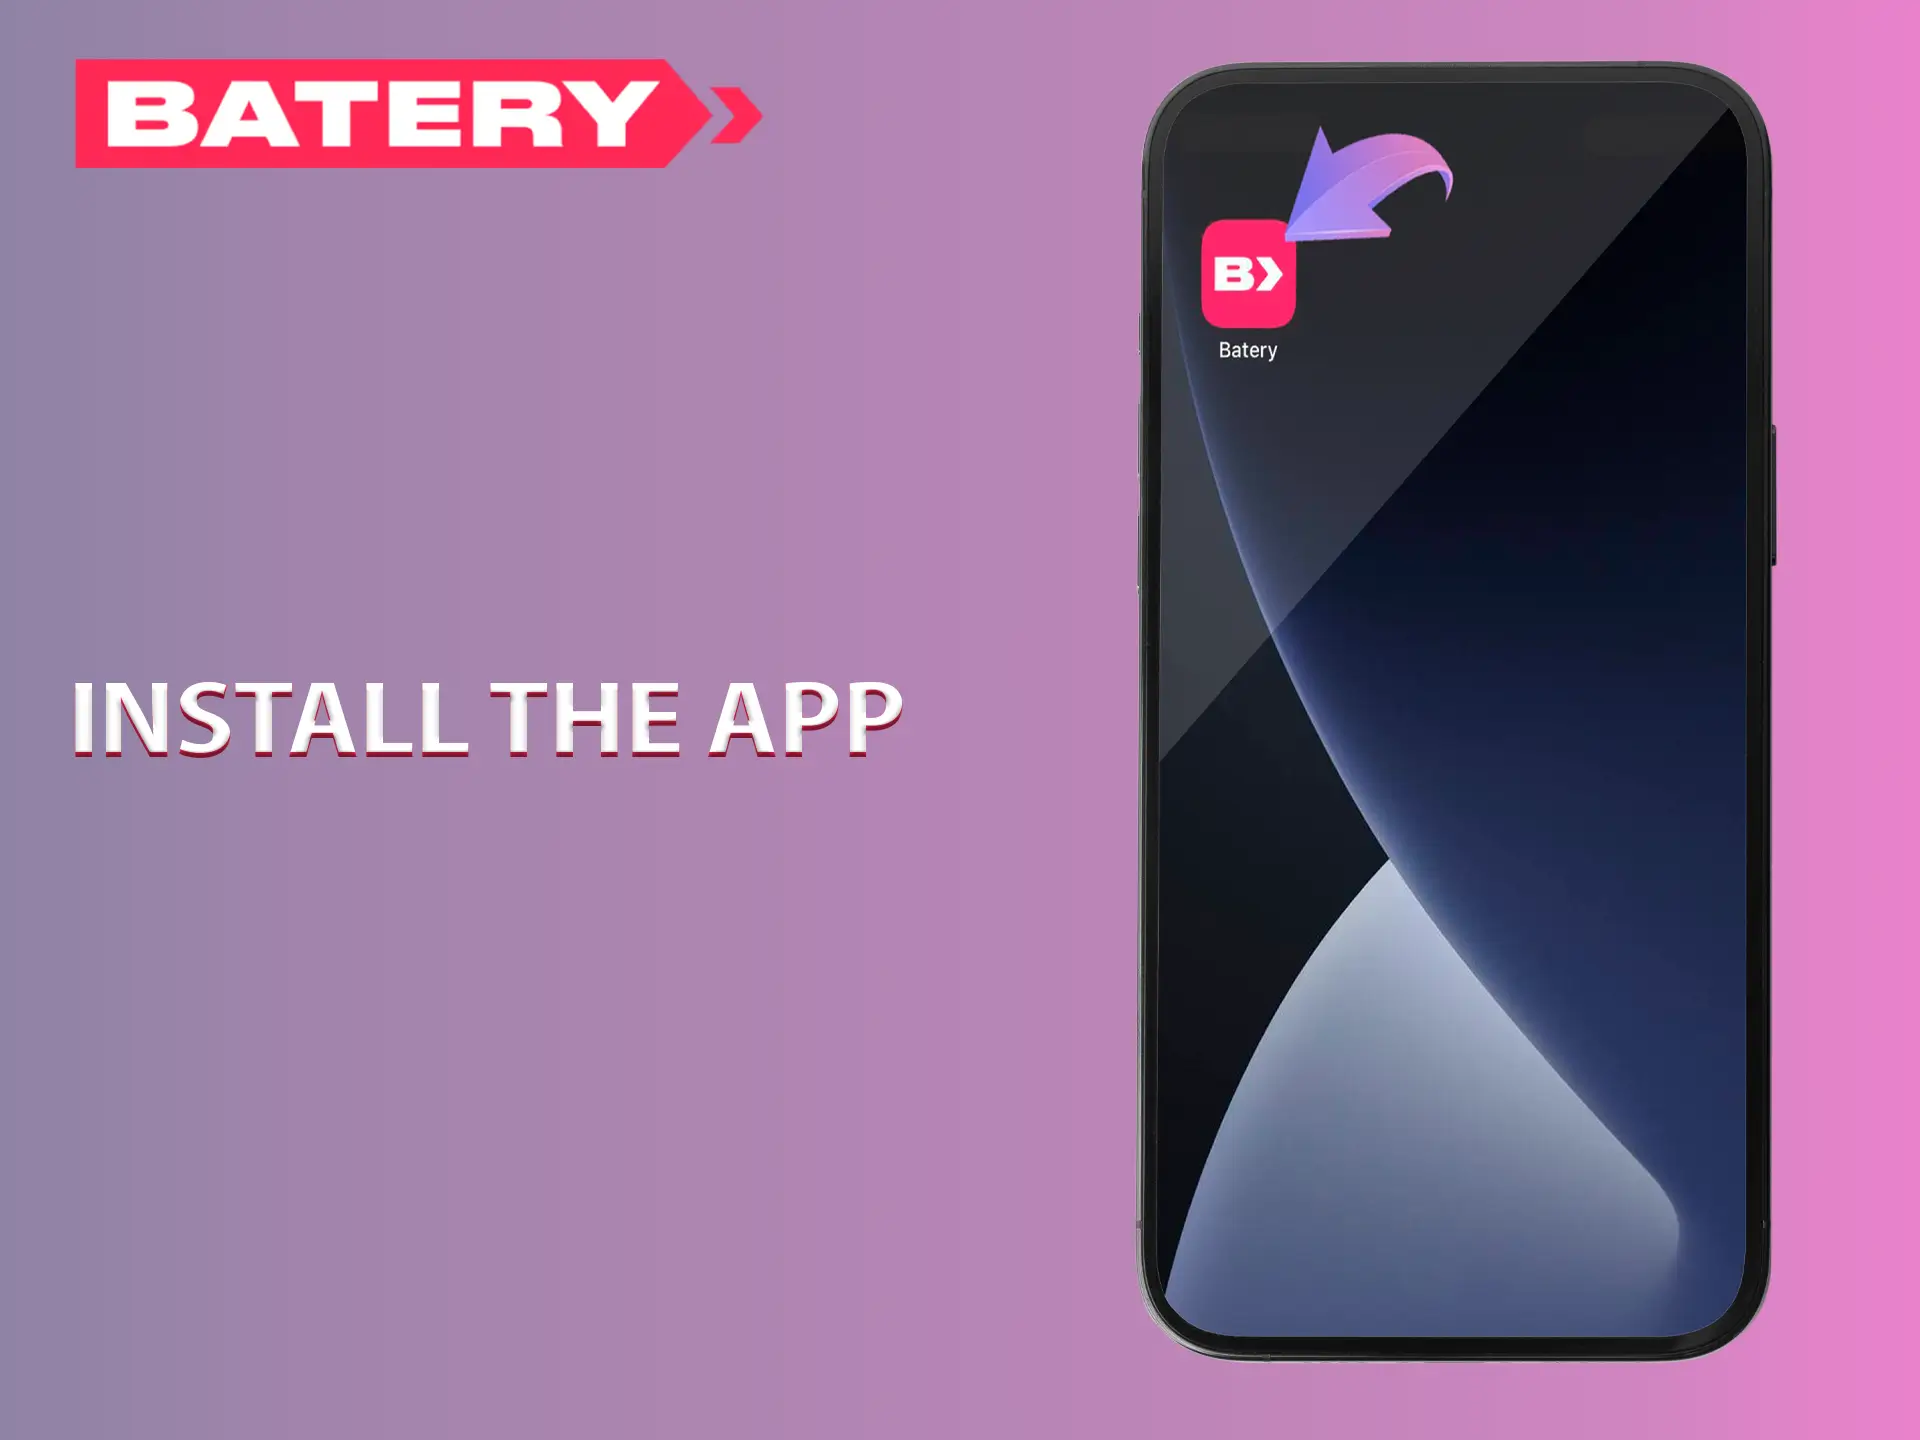 Perform the installation of the Batery app on your ios device.